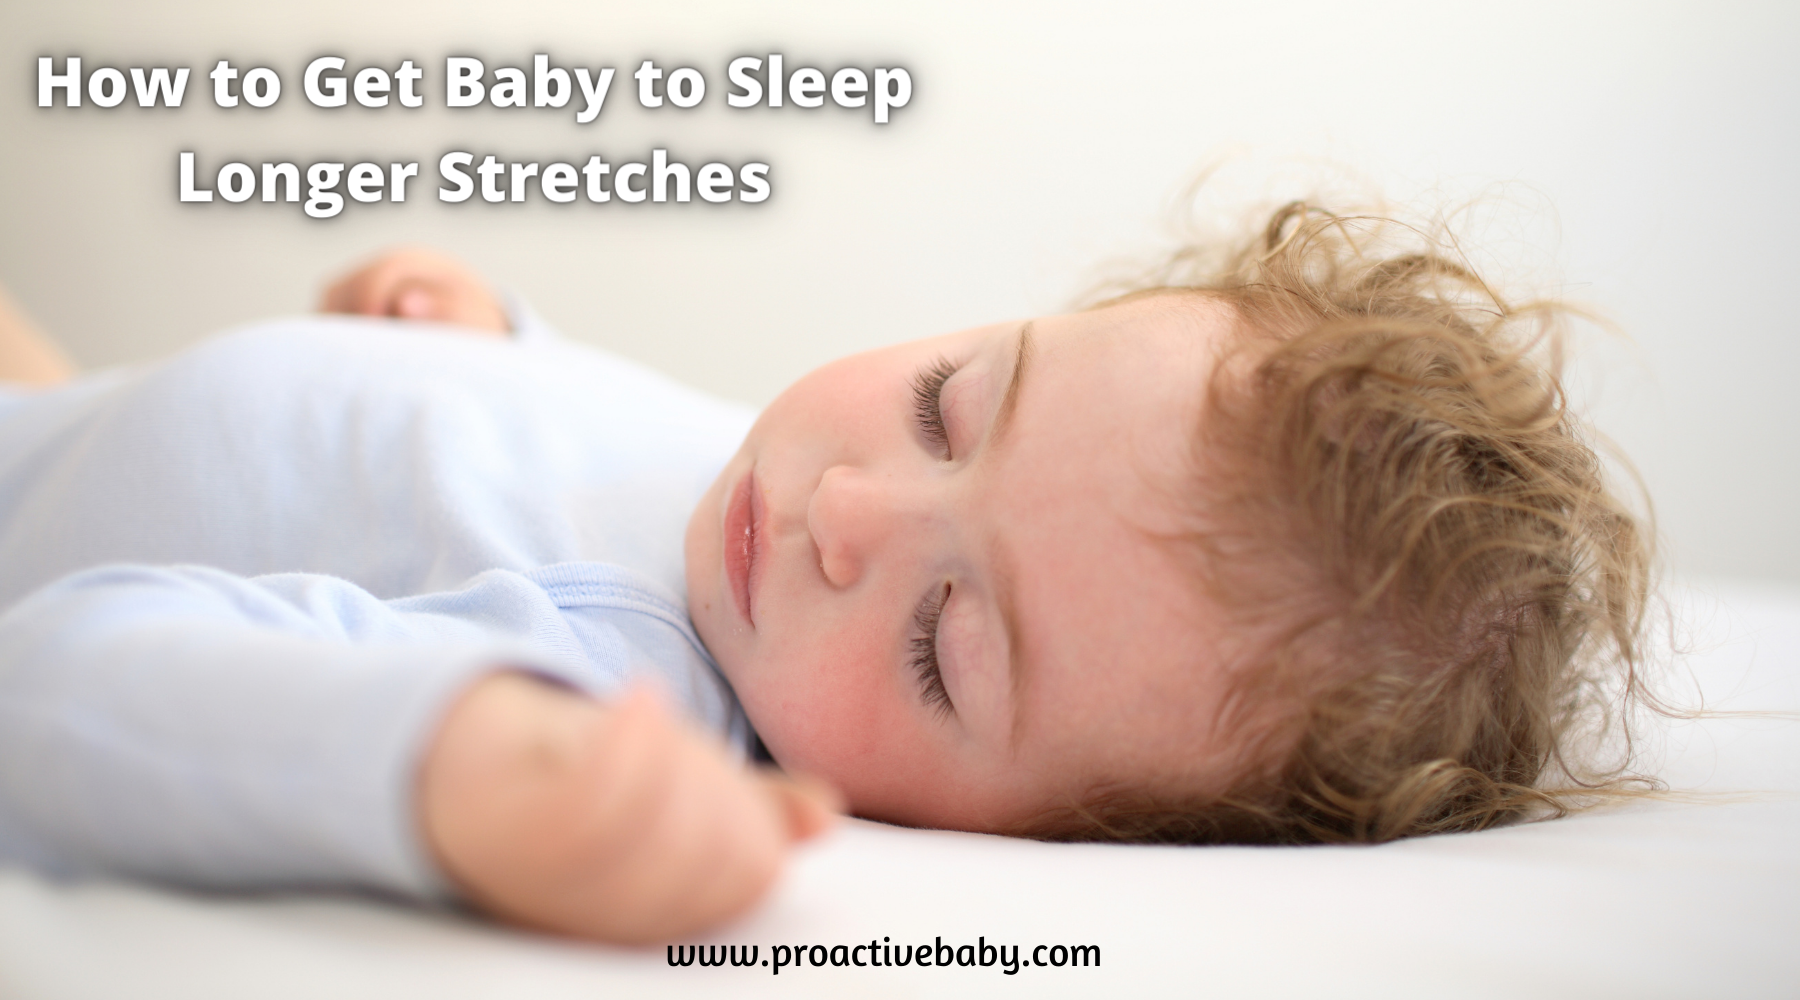 How to Get Baby to Sleep Longer Stretches